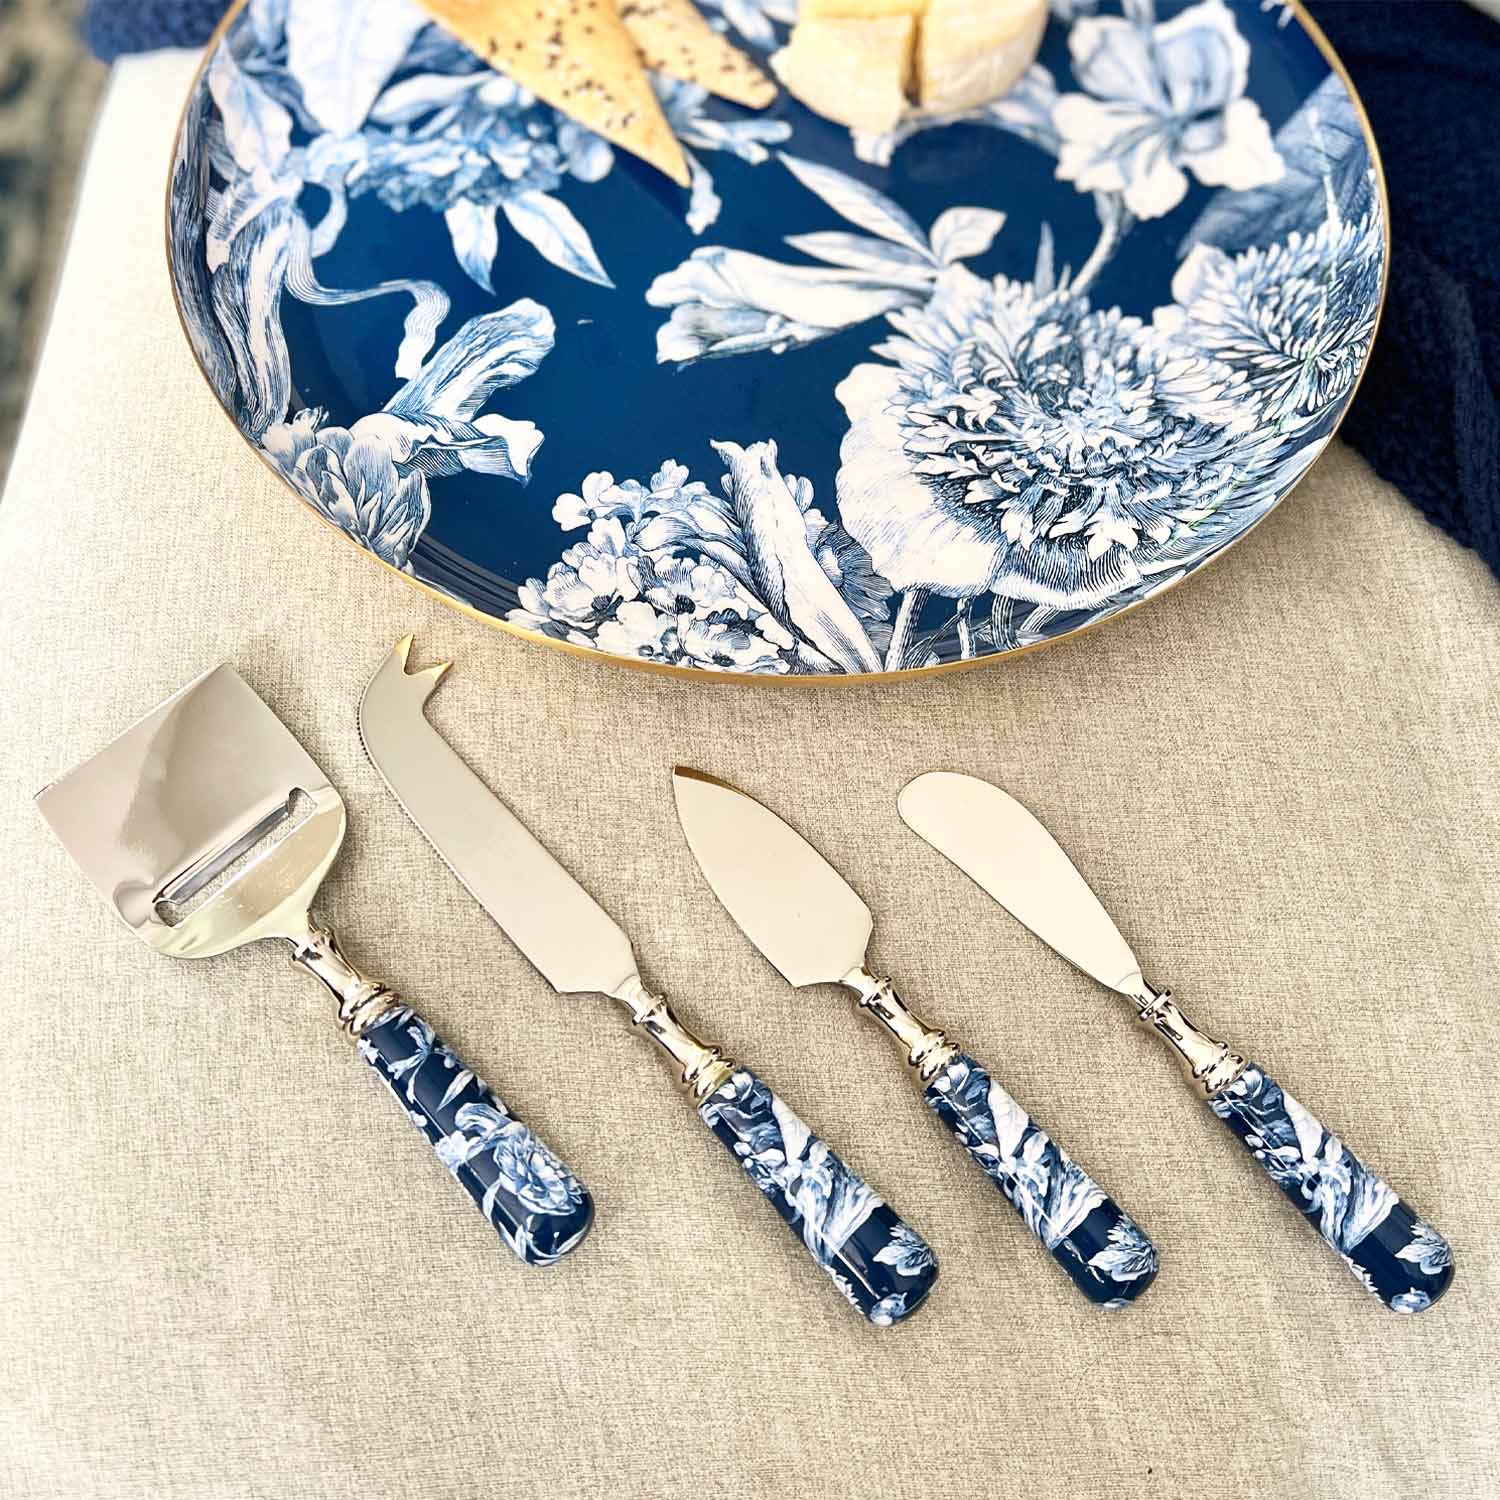 Cheese Knives, Set of 4 - Brittany Bleu